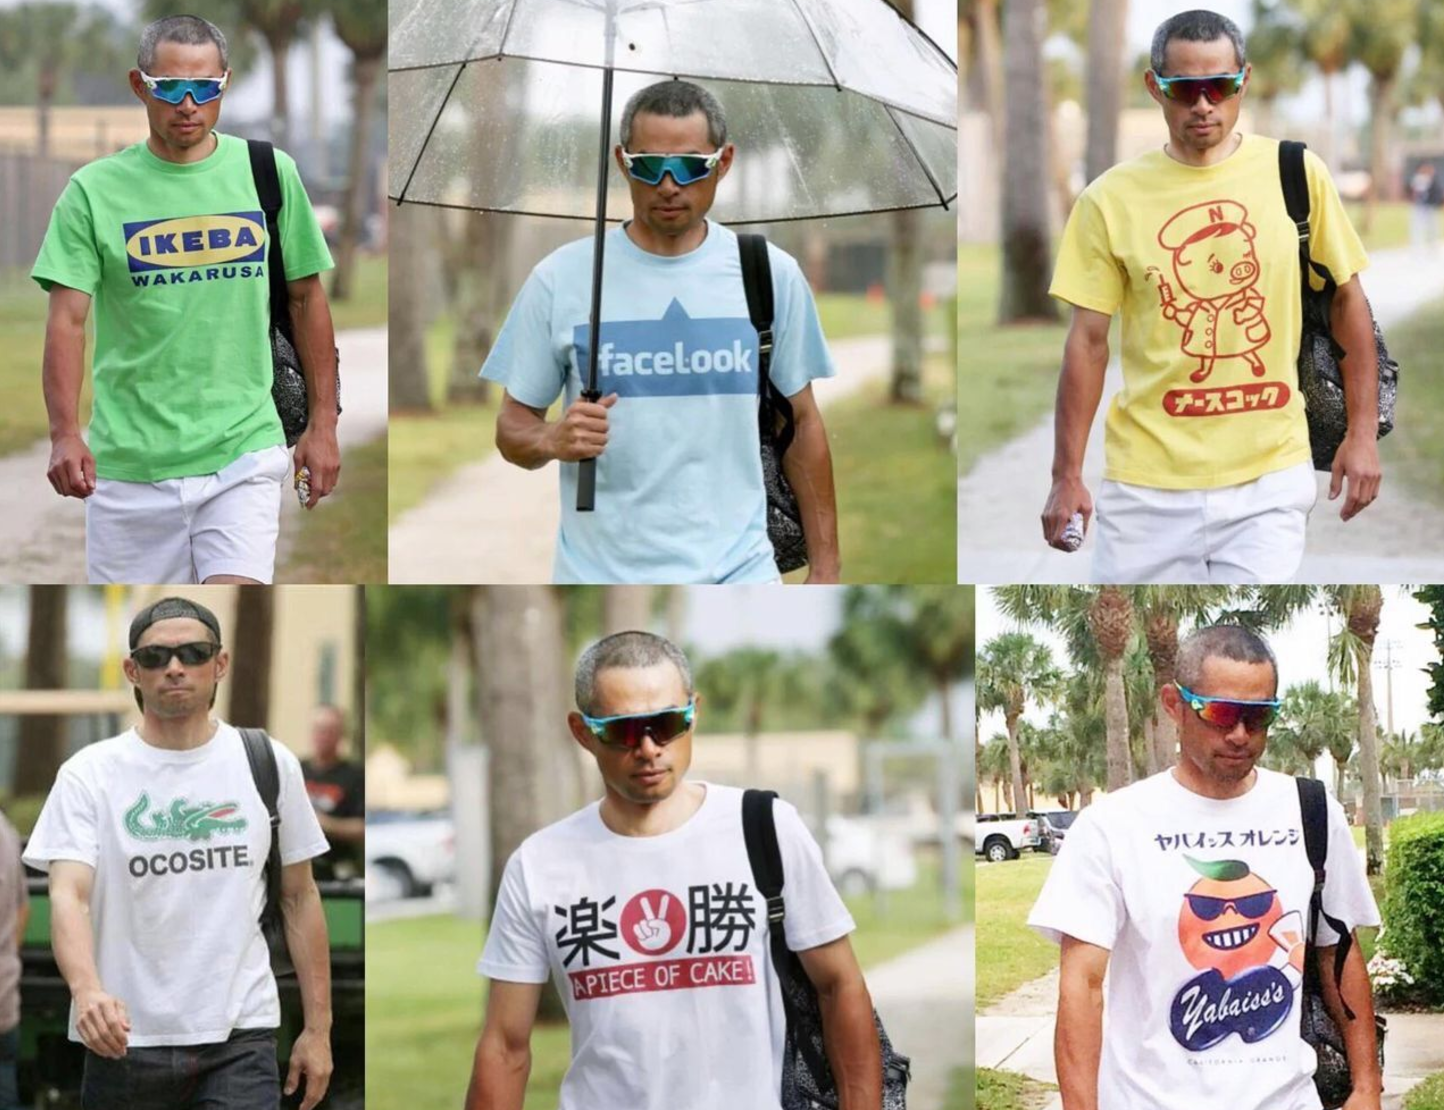 Let's take a look at the t-shirts collection of Japanese professional baseball player, Ichiro